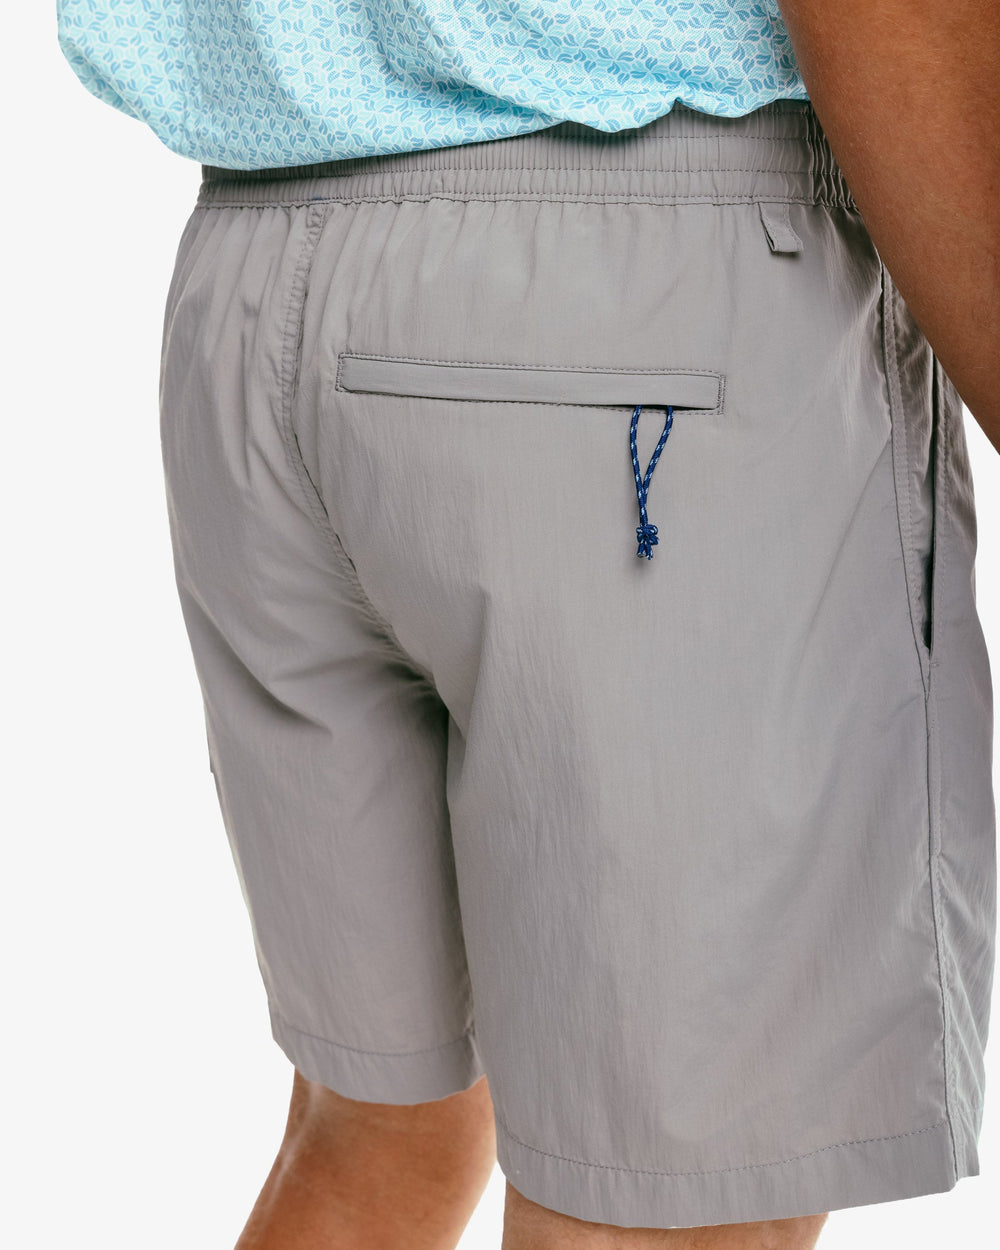 The model detail view of the Men's Shoreline 6 Inch Short by Southern Tide  - Frost Grey